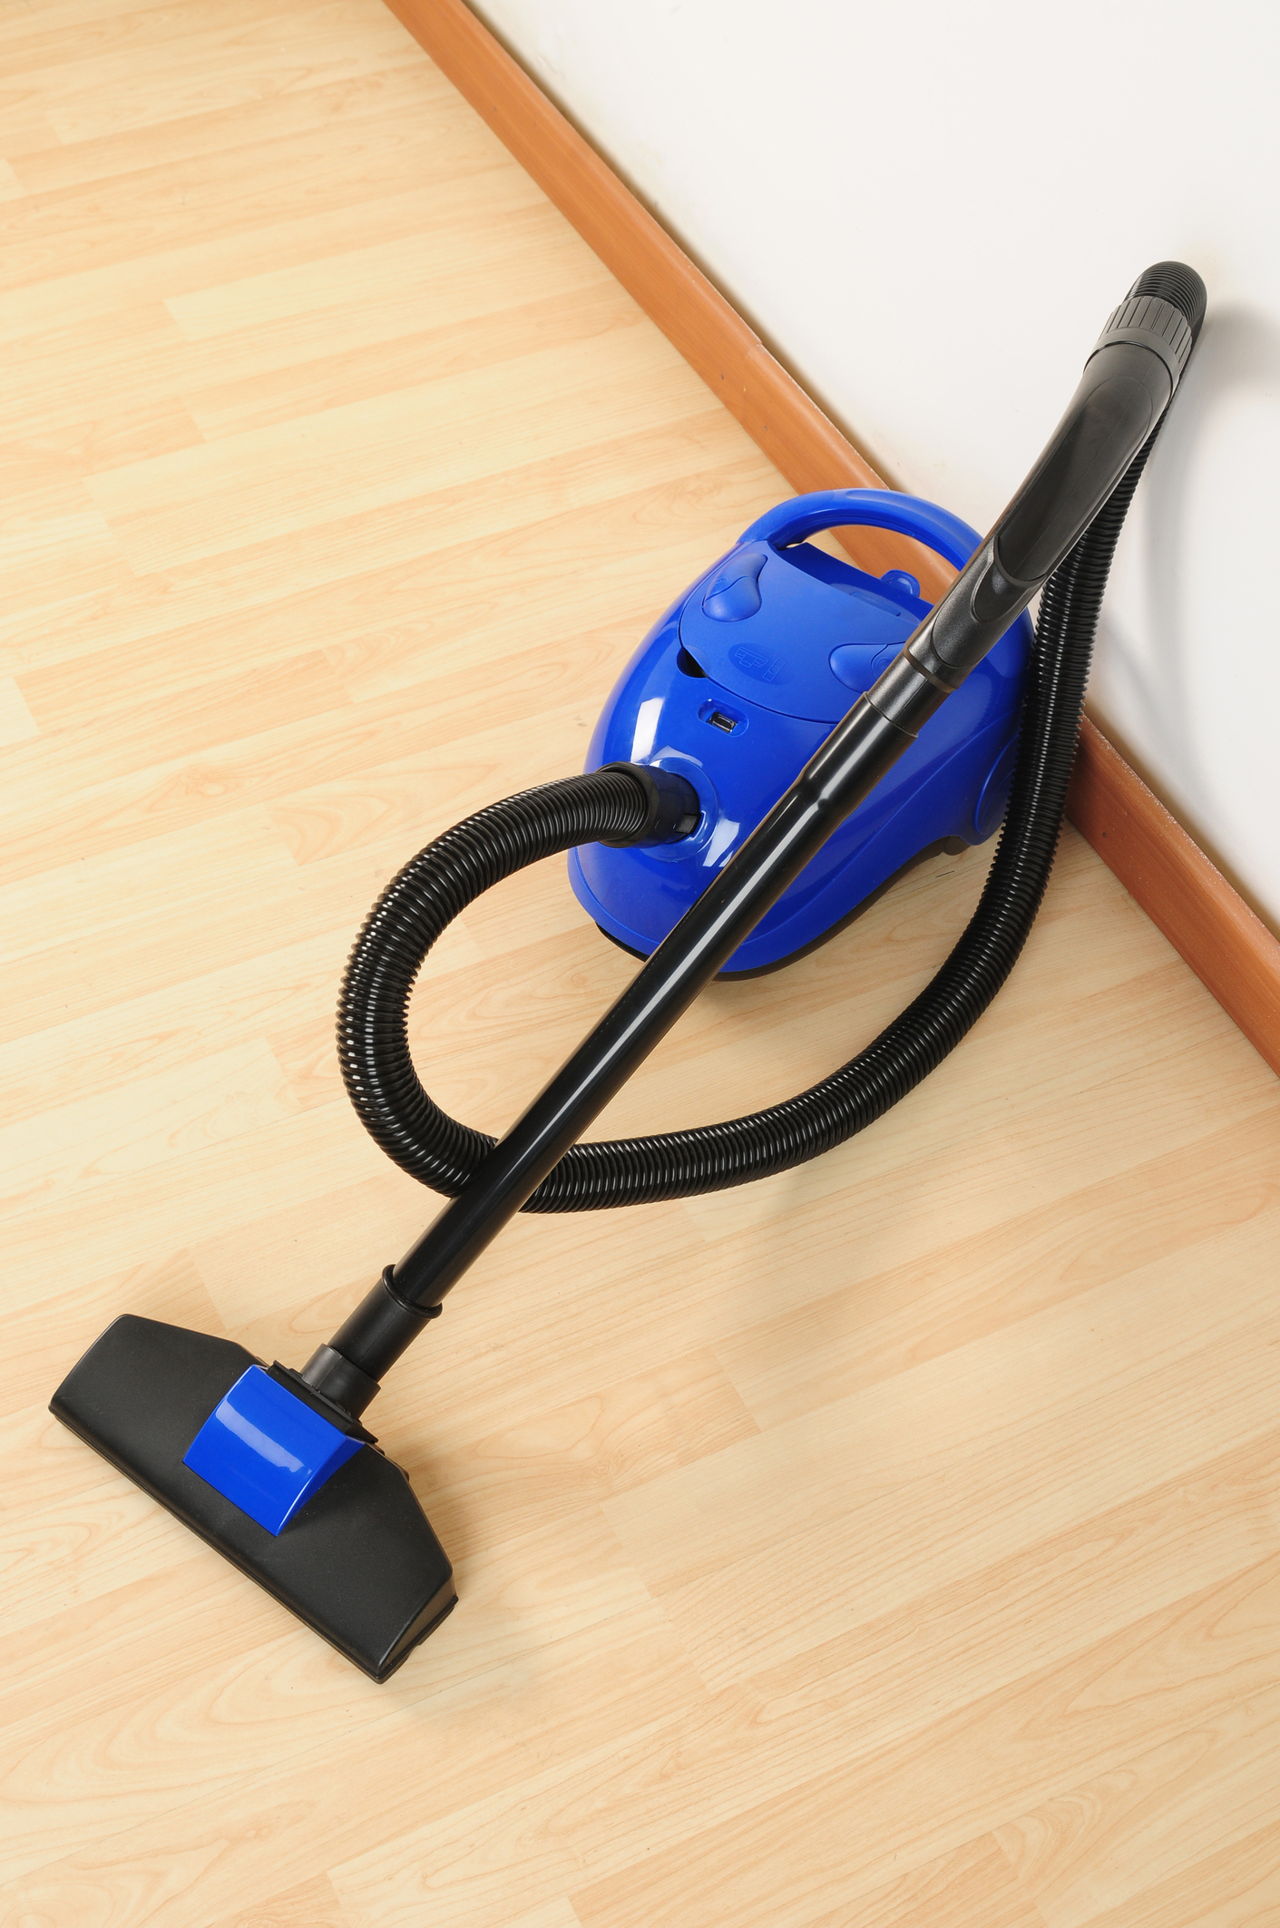 Clean Laminate Floors Without Streaking, How To Clean Wood Laminate Floors Without Leaving Streaks